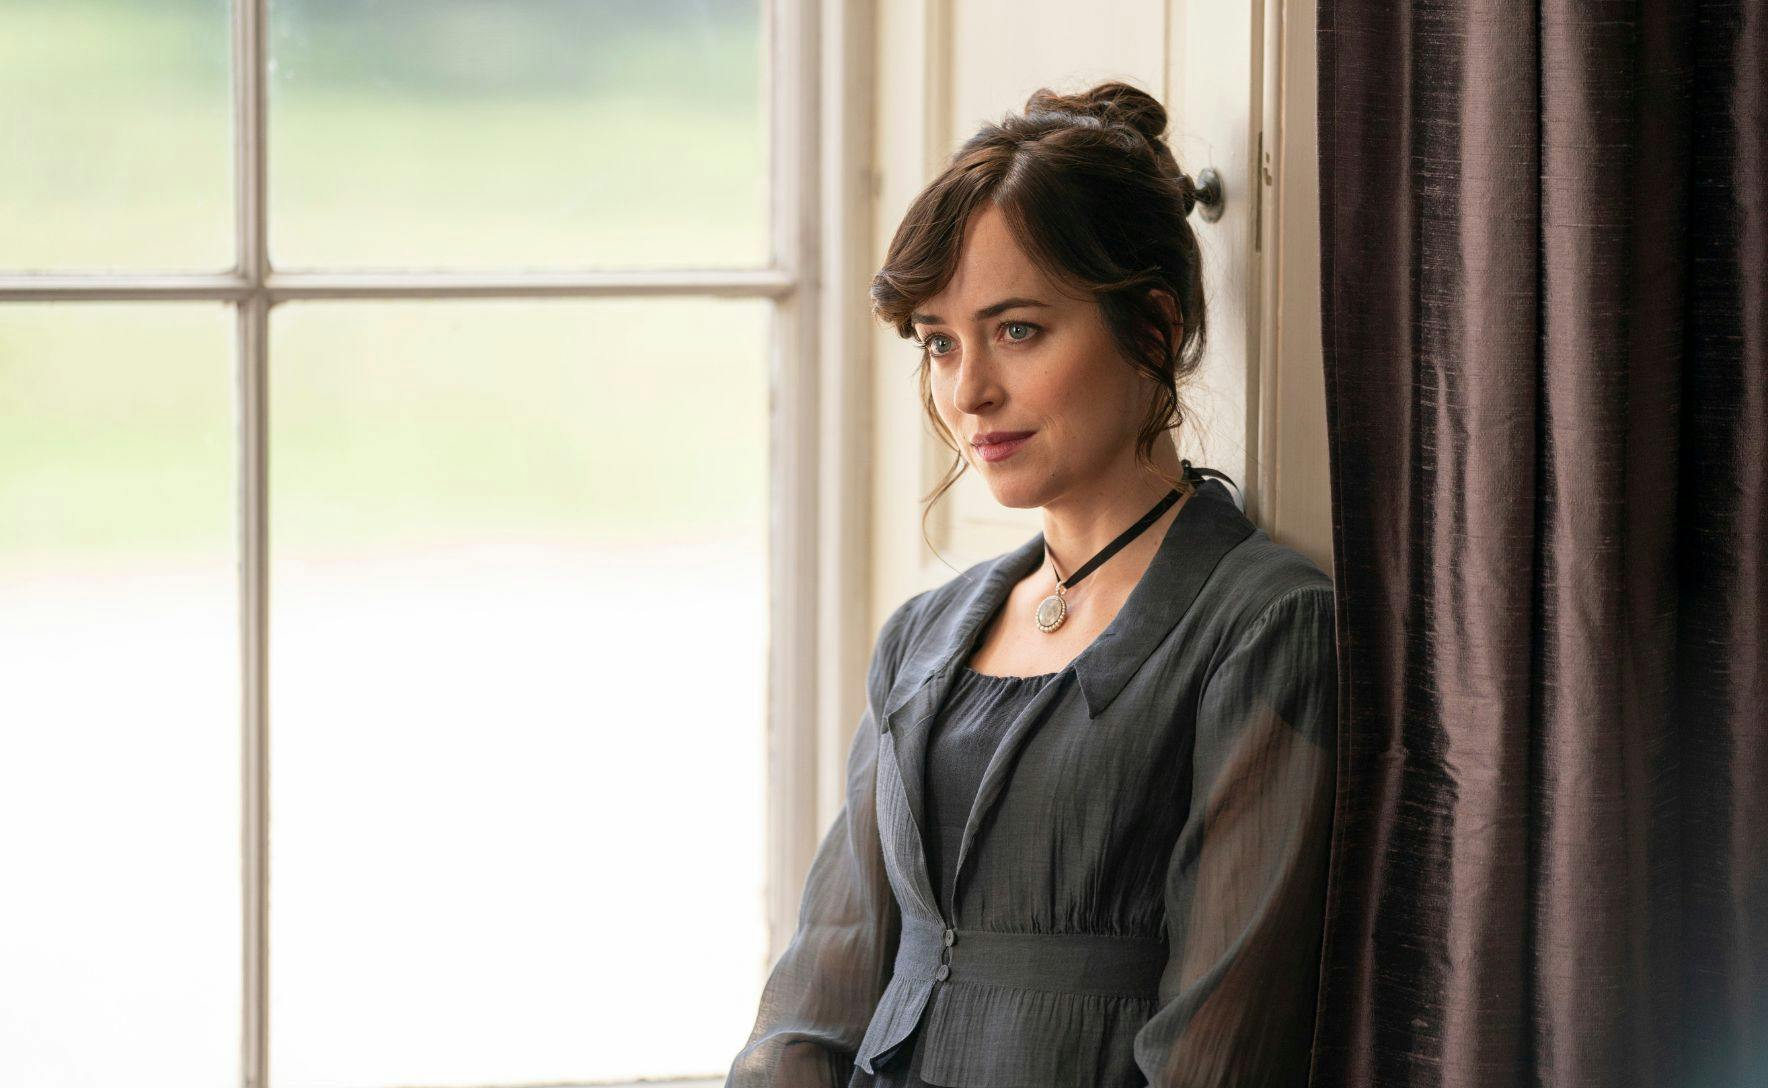 Dakota Johnson as Anne Elliot in Persuasion. She is leaning against a window, with brown curtains behind her. She wears a grey Regency style dress and her reddish hair is in a messy bun.